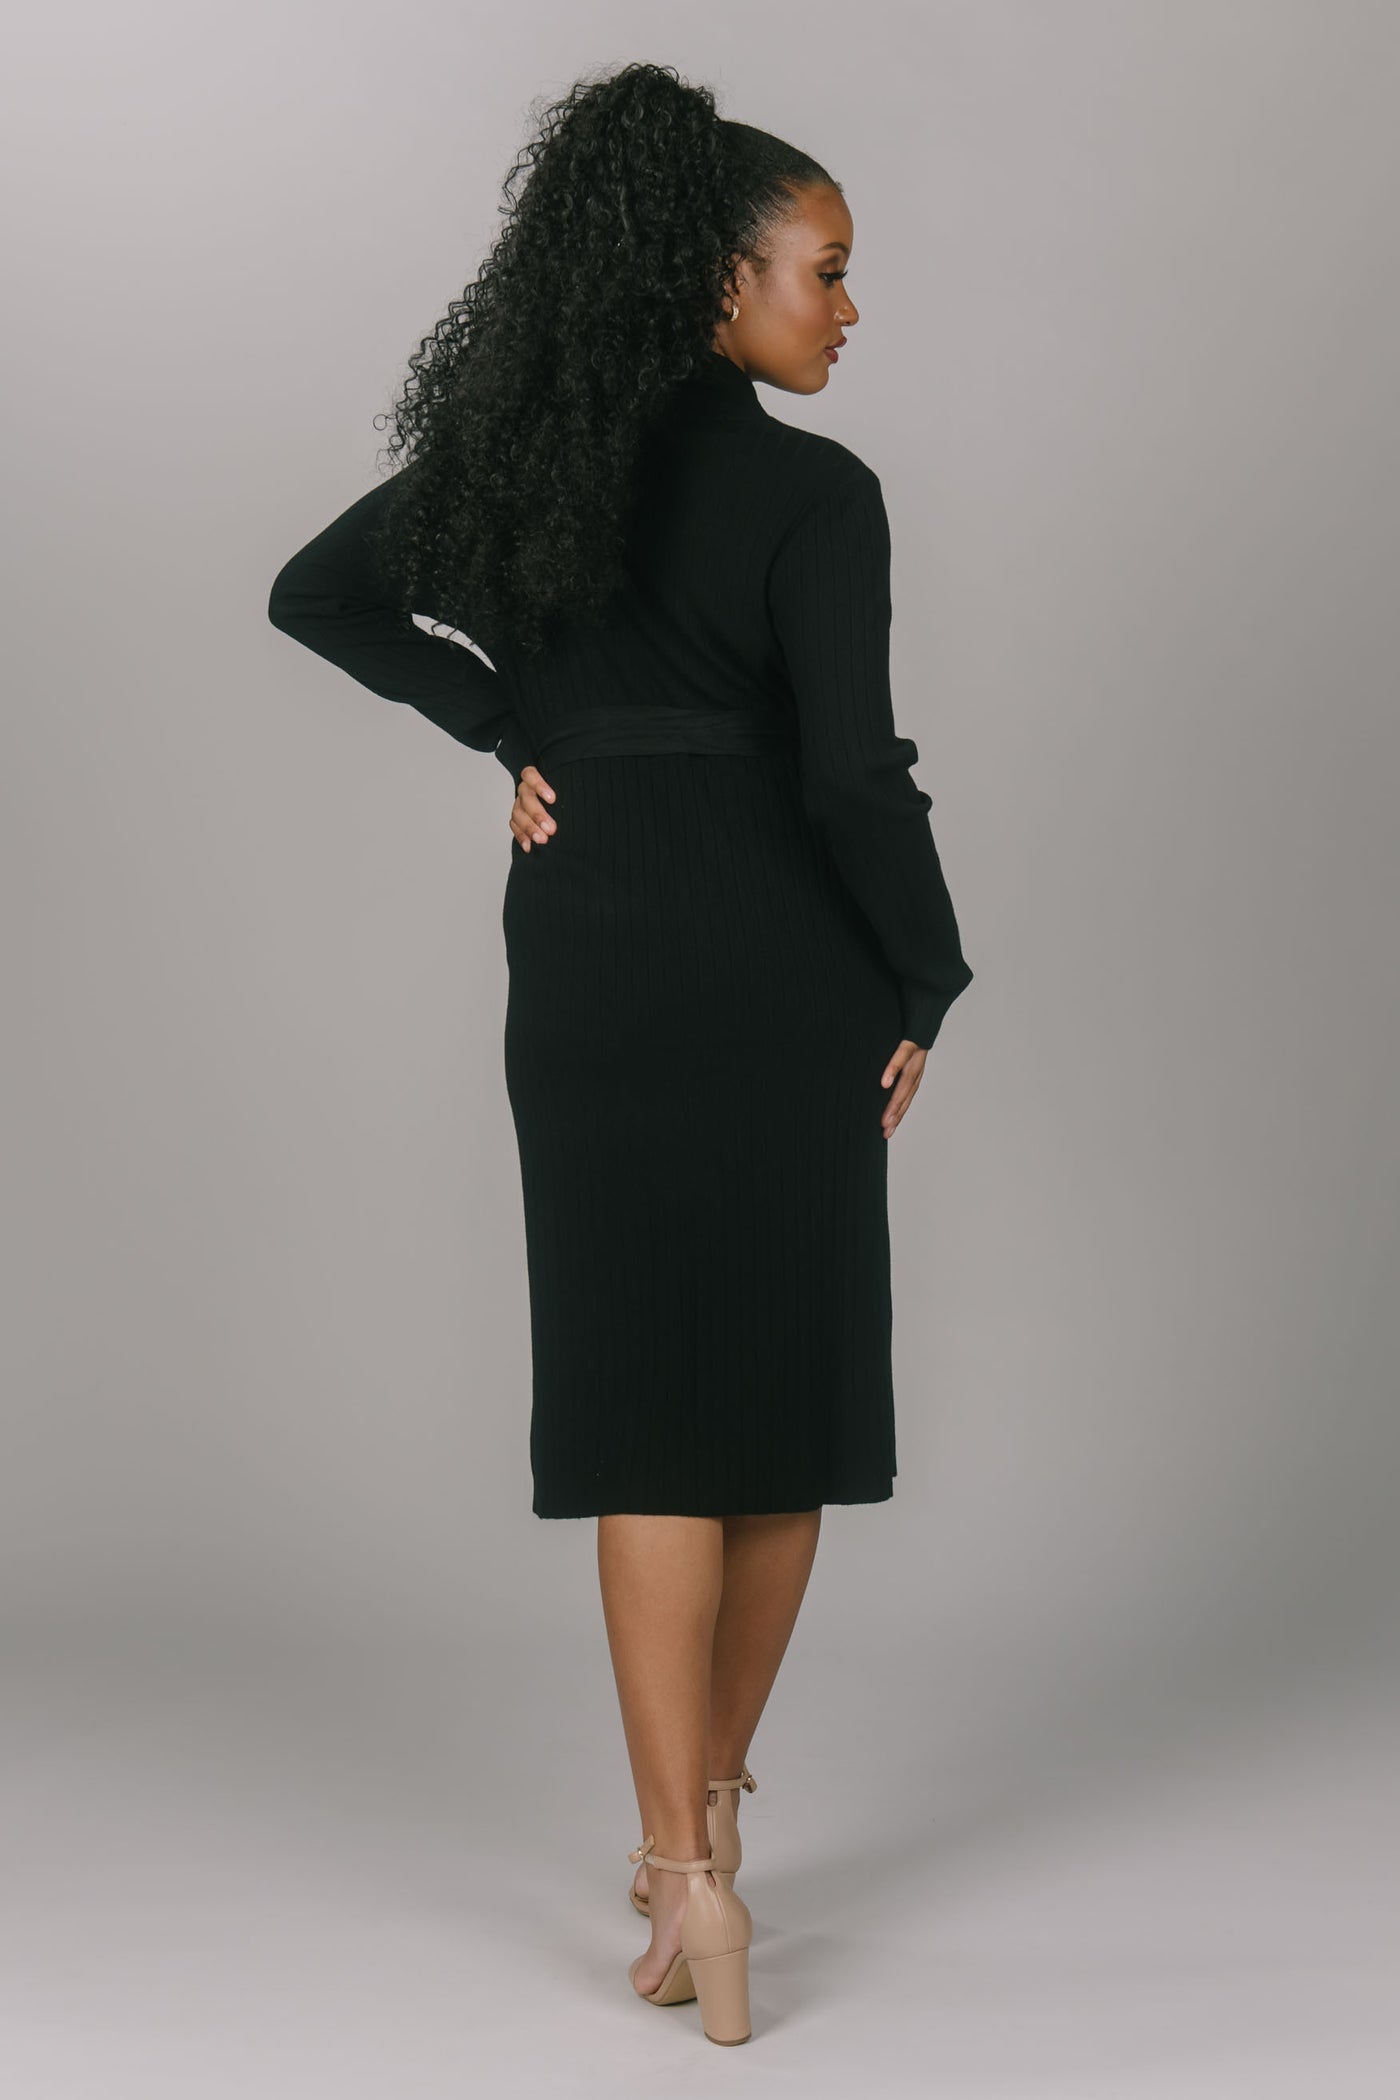 Back view of modest black sweater dress. It has a tie at the waist and a turtleneck. This dress is long sleeved, making it the perfect winter modest dress for church.